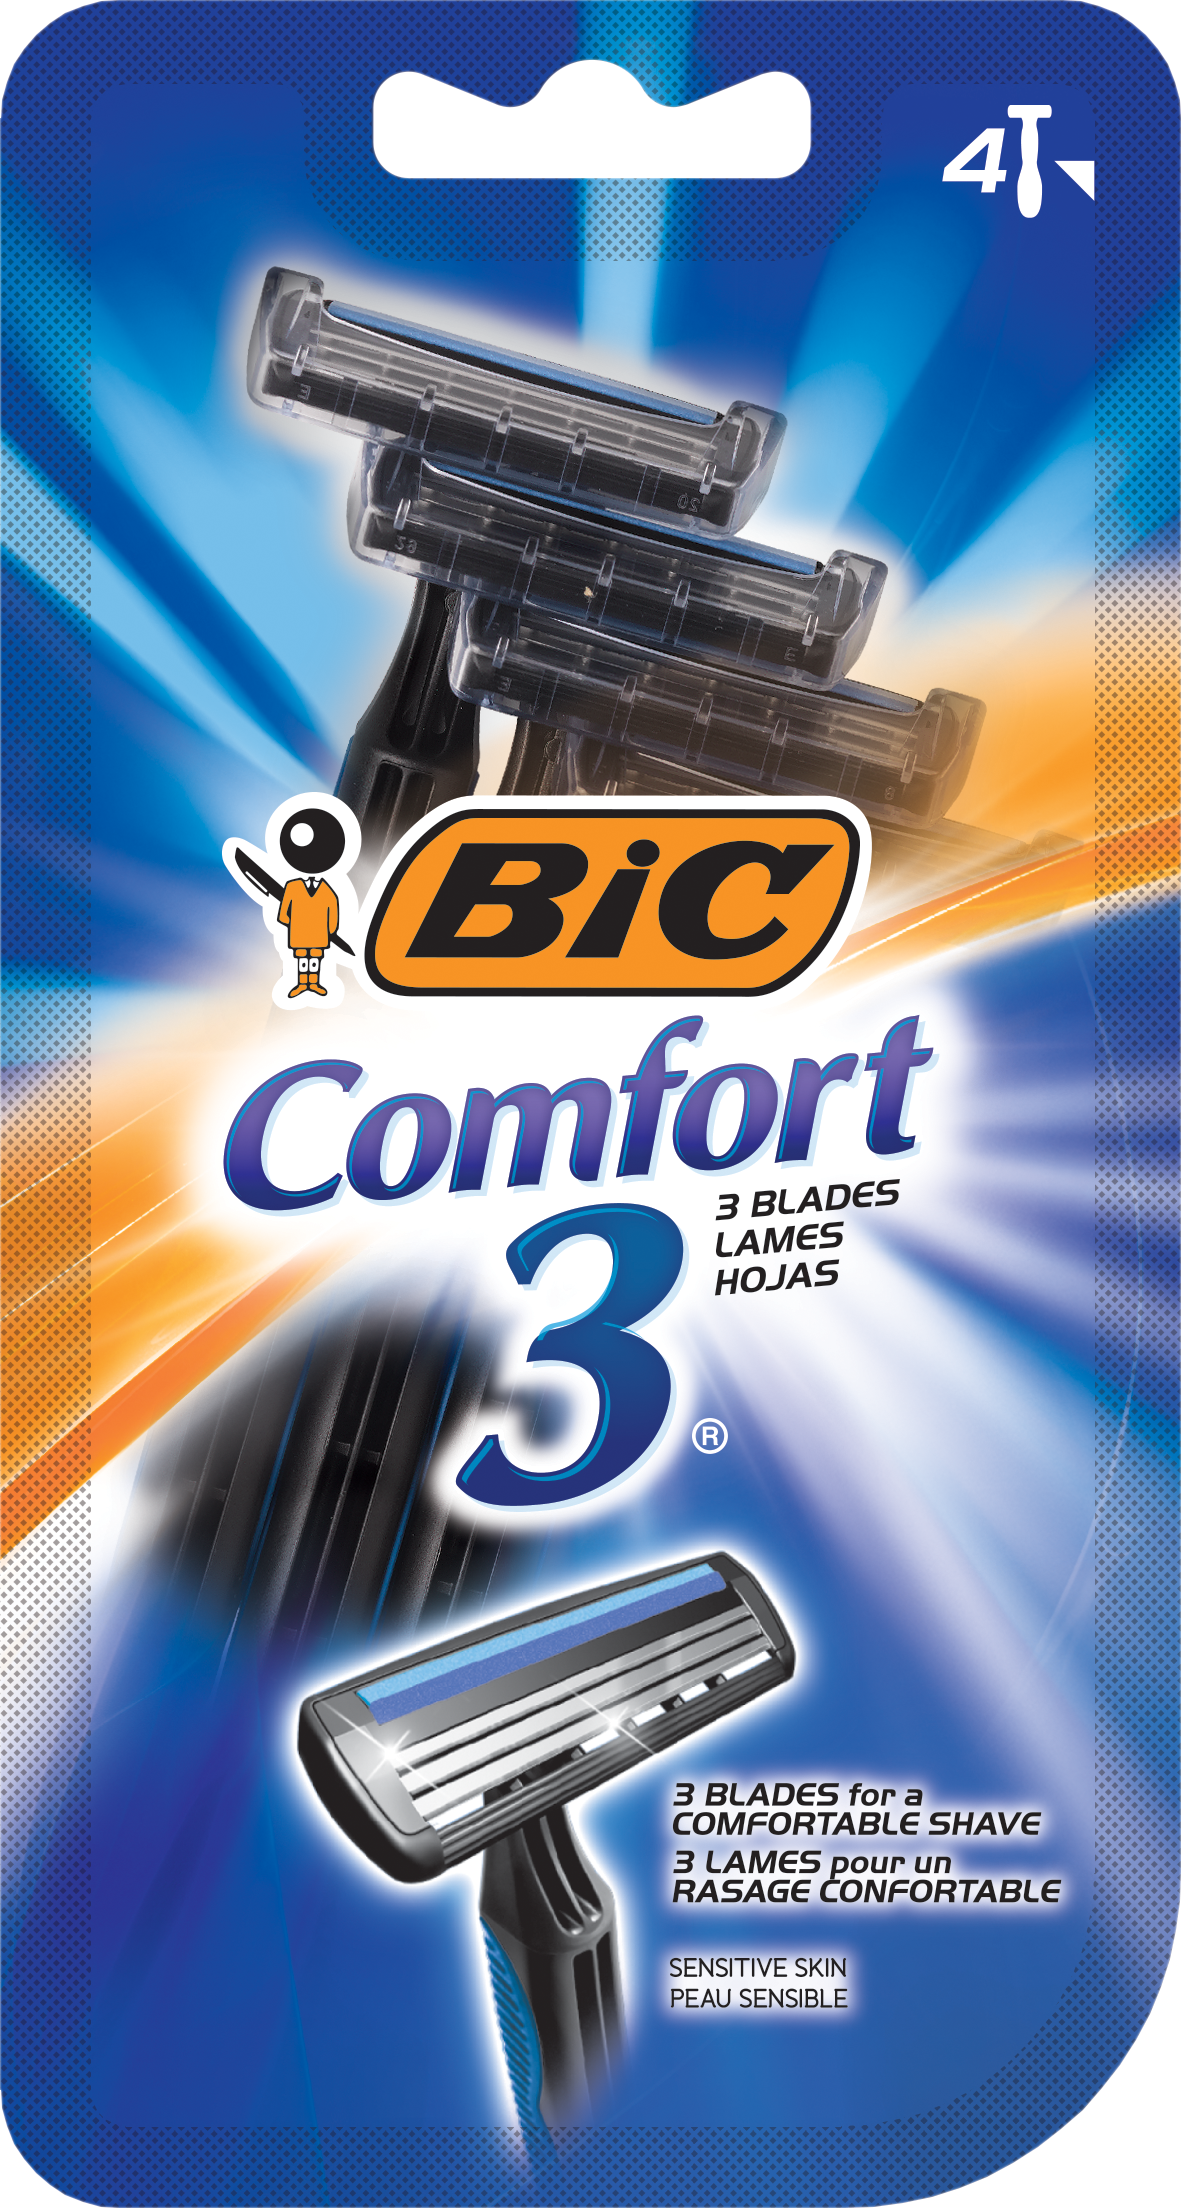 BIC Comfort 3 Disposable Men's Razor, 3 Blade Razor for a Comfortable Shave, 4-Count - image 1 of 7